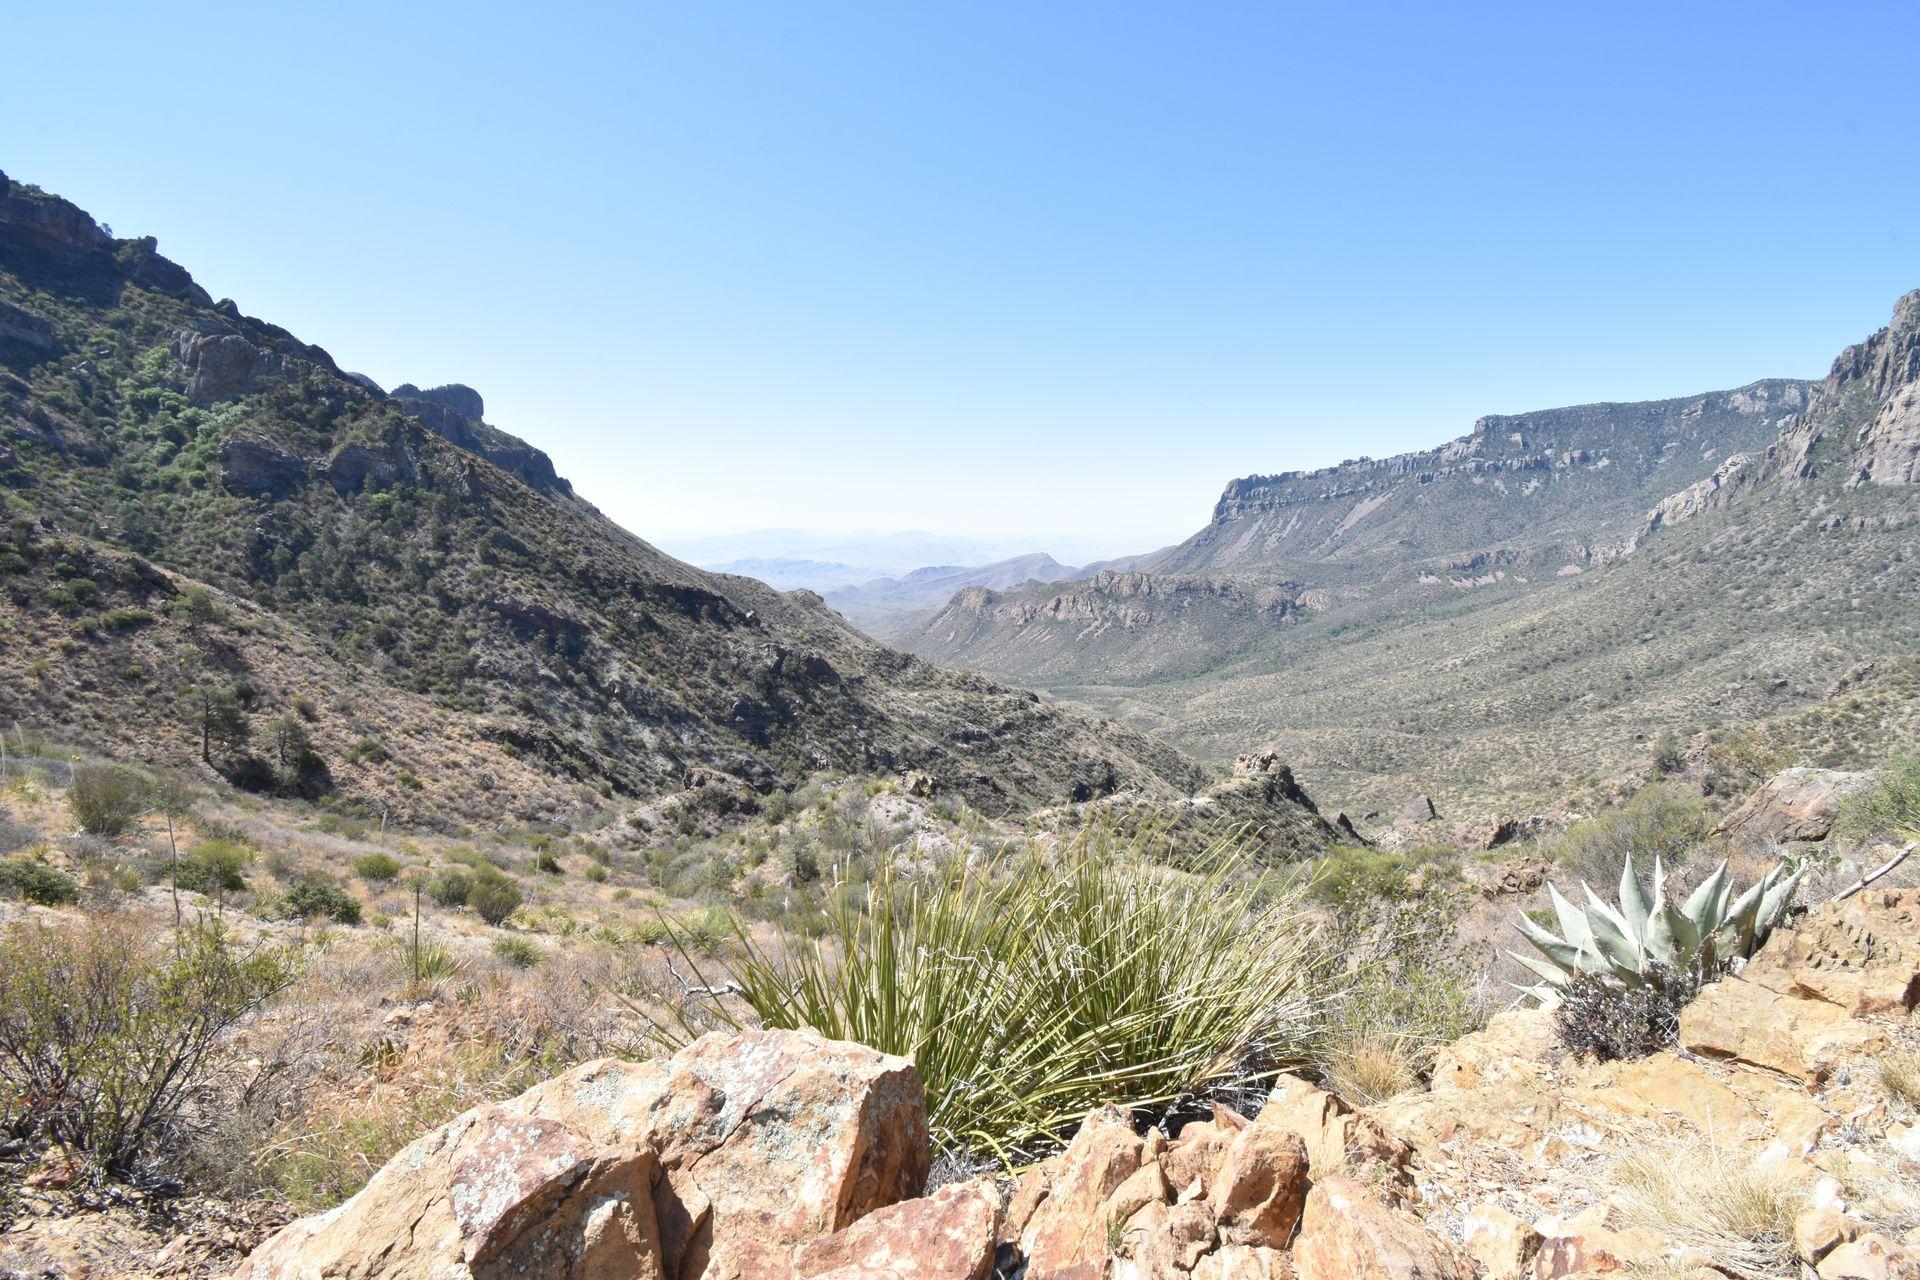 An expansive view of the desert mountains from the Lost Mine trail.